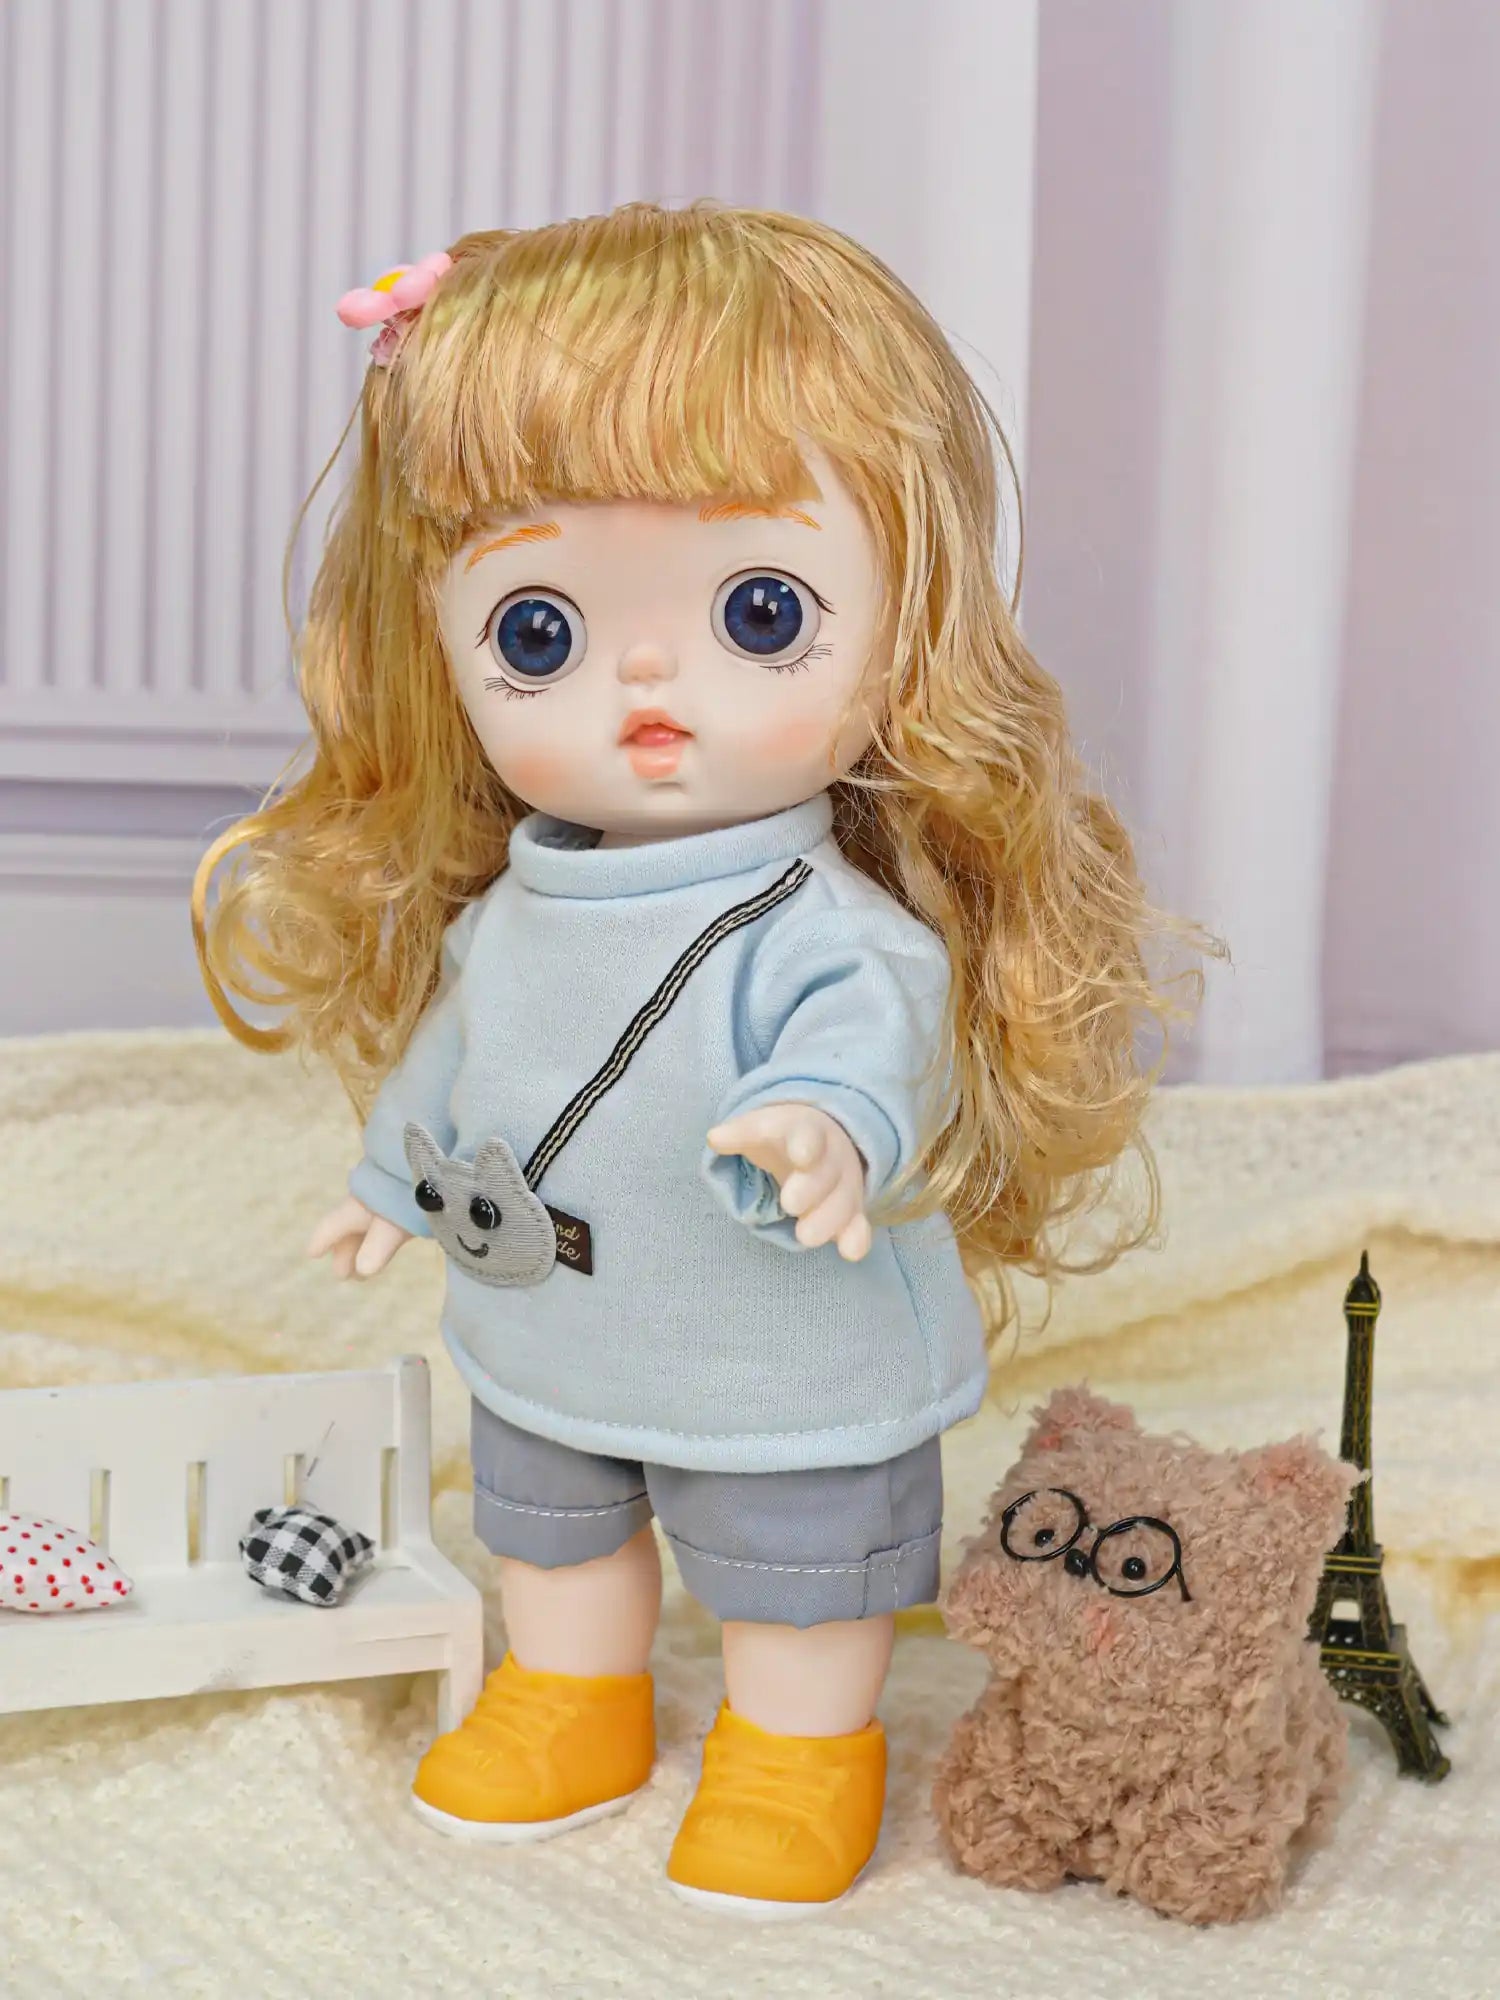 Curious-eyed doll with a cute outfit, featuring an animal pouch, next to a fuzzy toy with glasses in a modeled playroom.